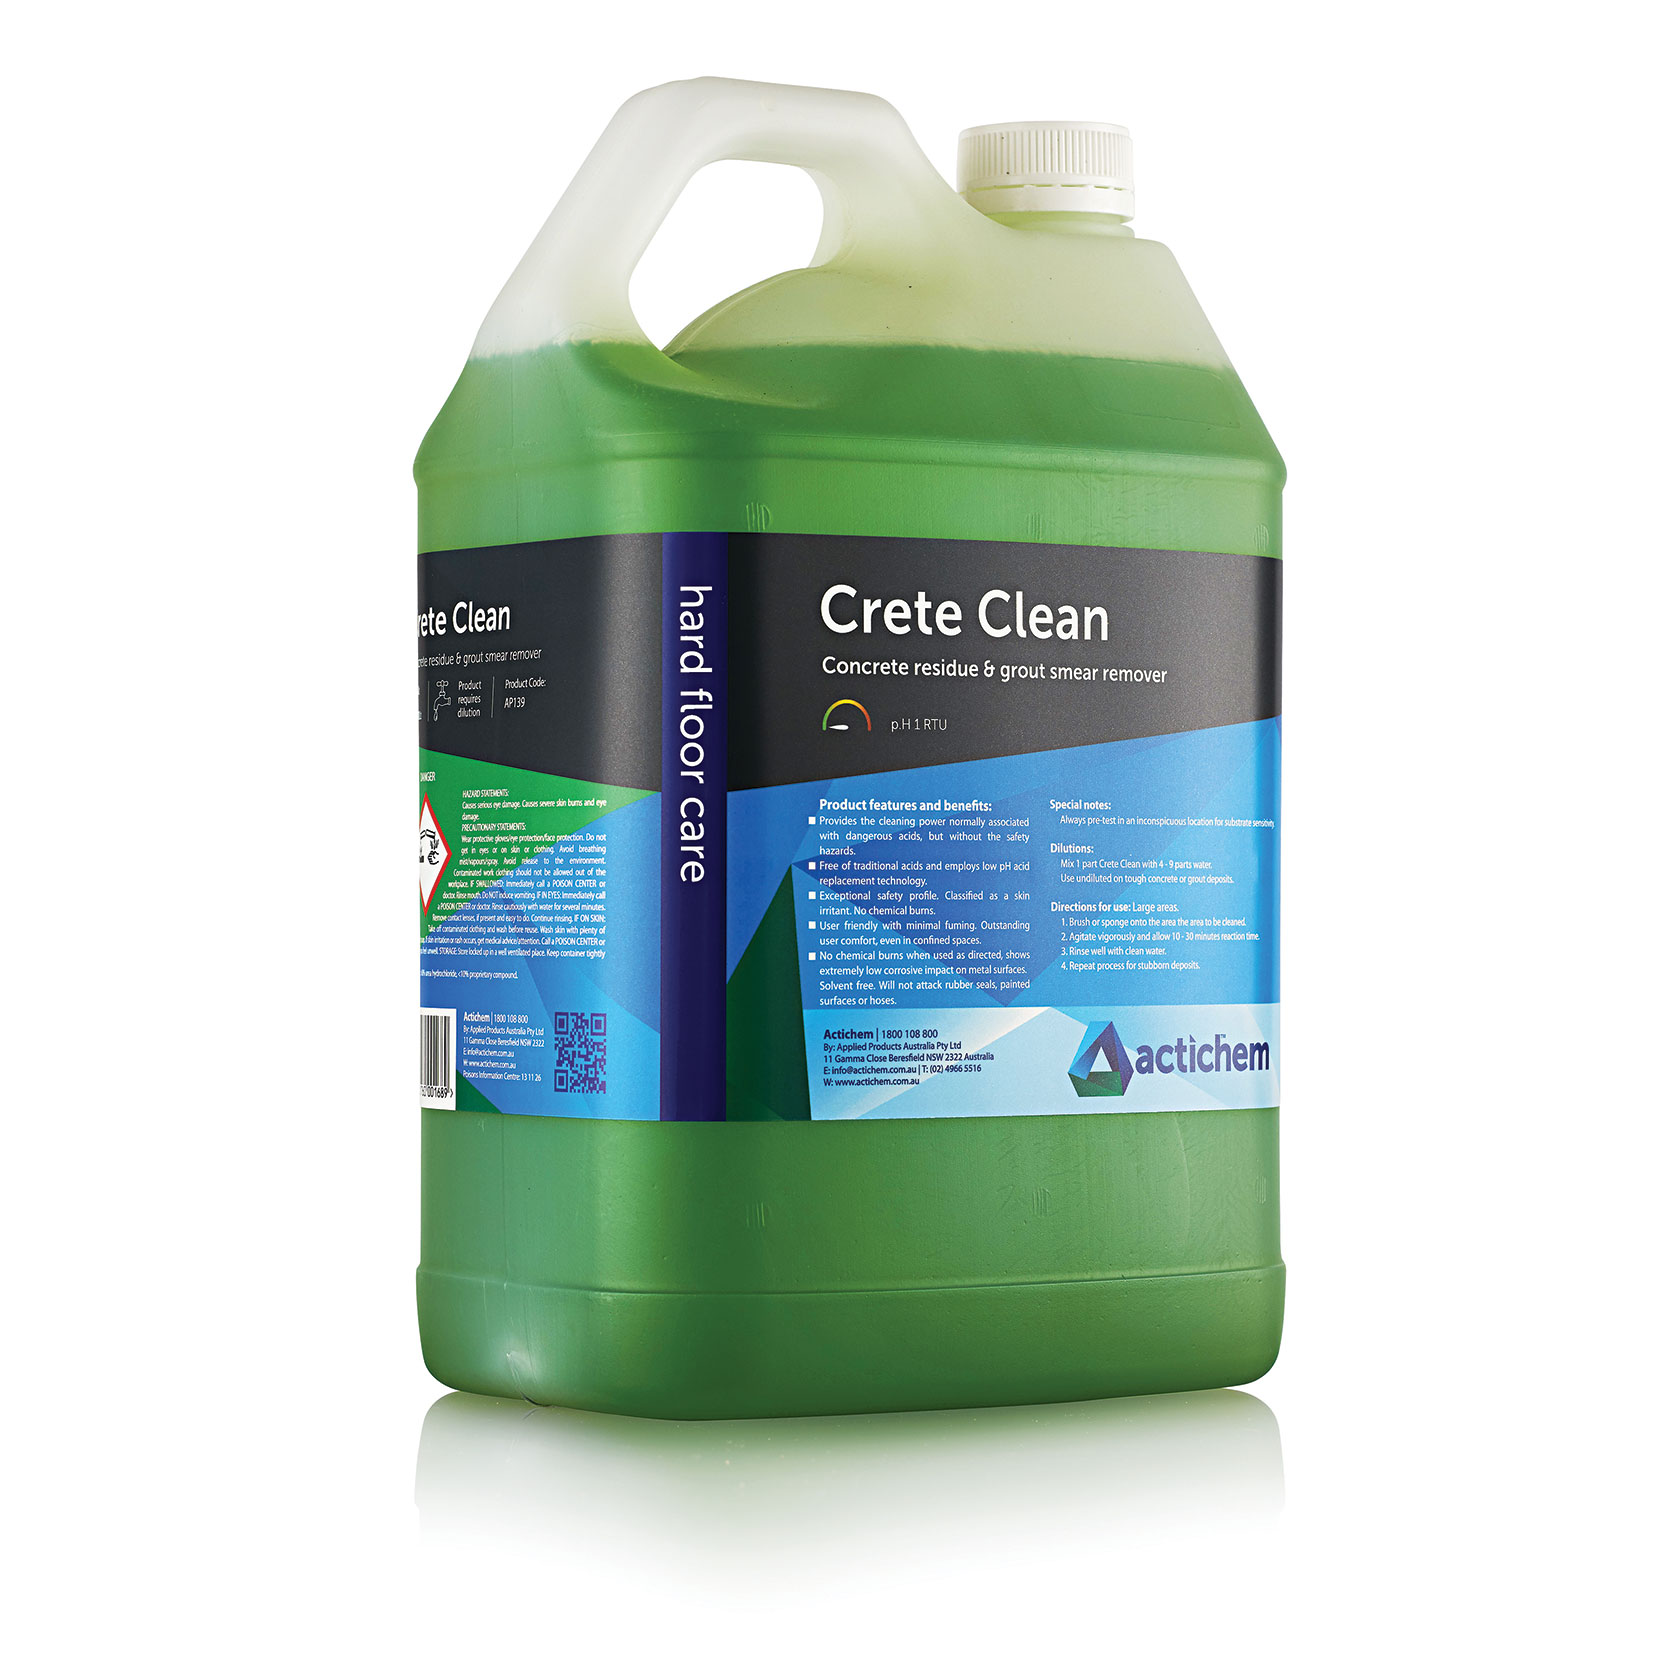 Actichem Crete Clean “Safe-acid” cleaner and concrete residue remover